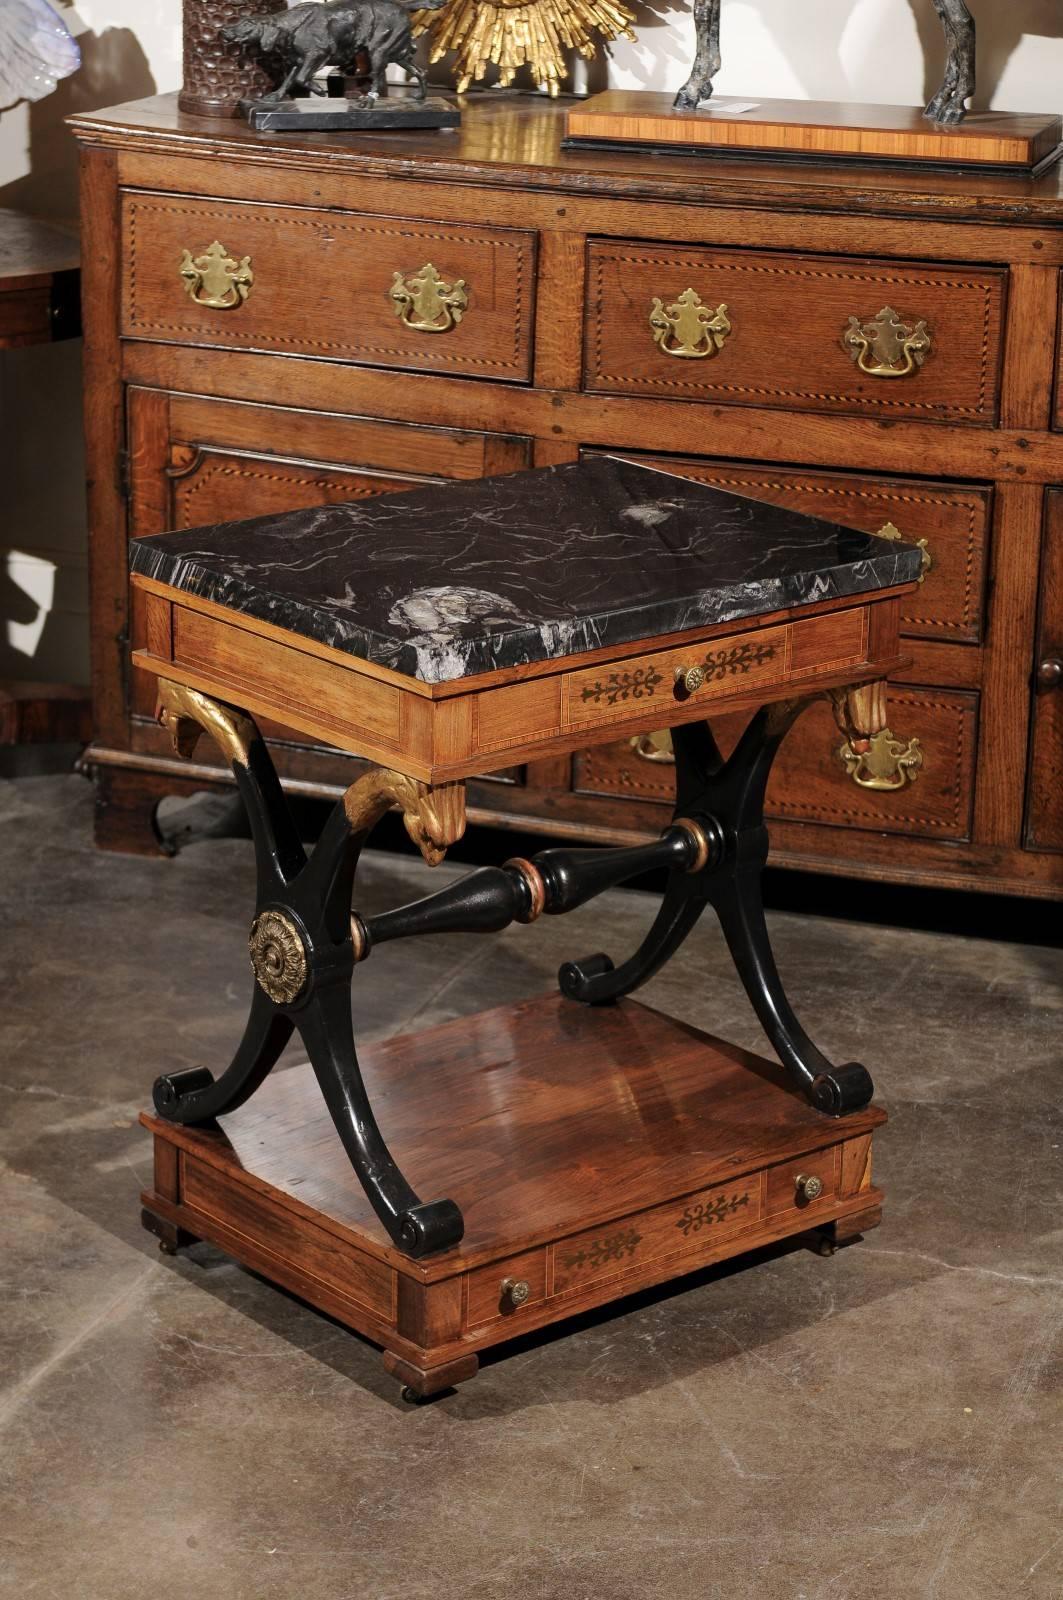 This English side table is an exquisite example of what Regency had to offer to England in the early 19th century. The two-toned rectangular stone top (black veined with white), is supported by an elegant apron with a single drawer in the front.